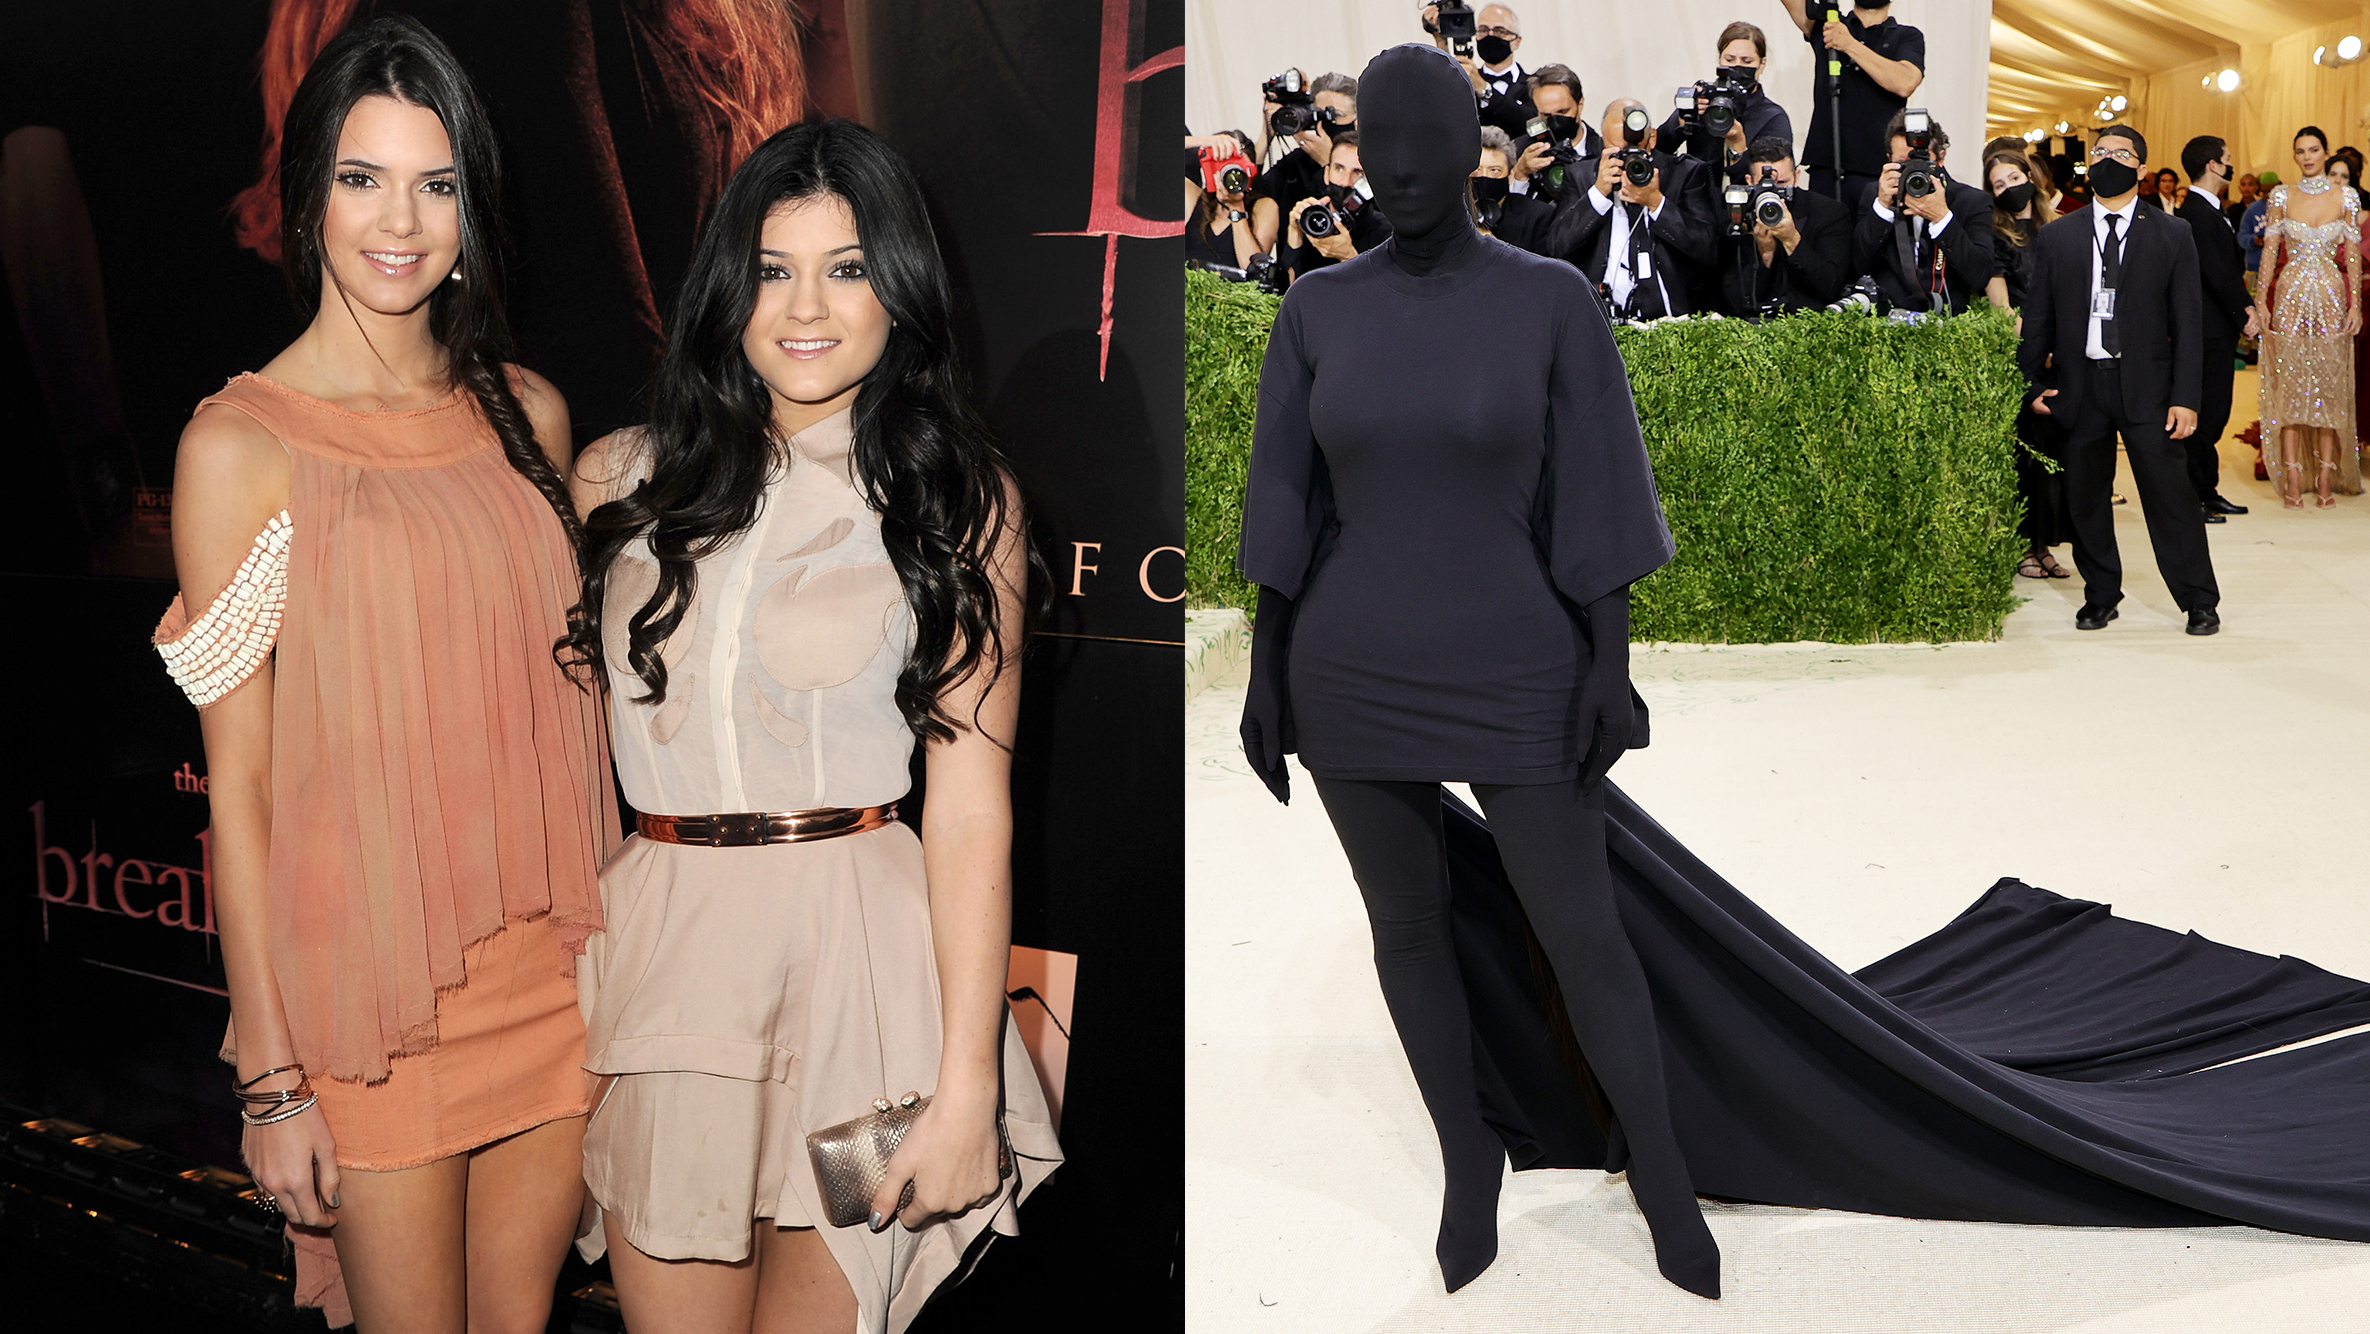 Kylie Jenner's Signature Red Carpet Style Has Come a Long Way